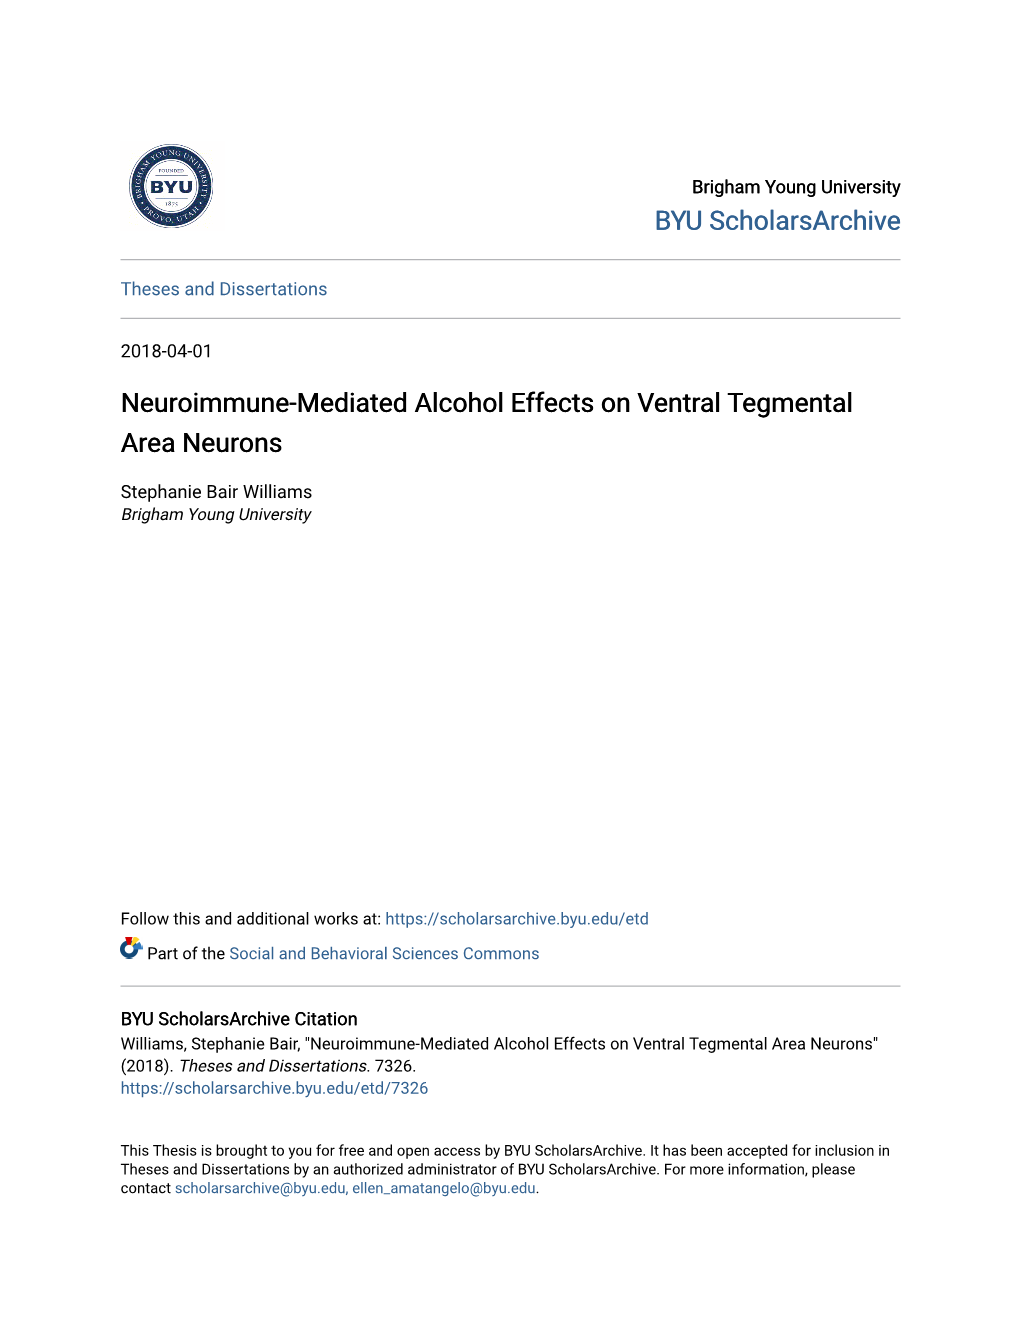 Neuroimmune-Mediated Alcohol Effects on Ventral Tegmental Area Neurons